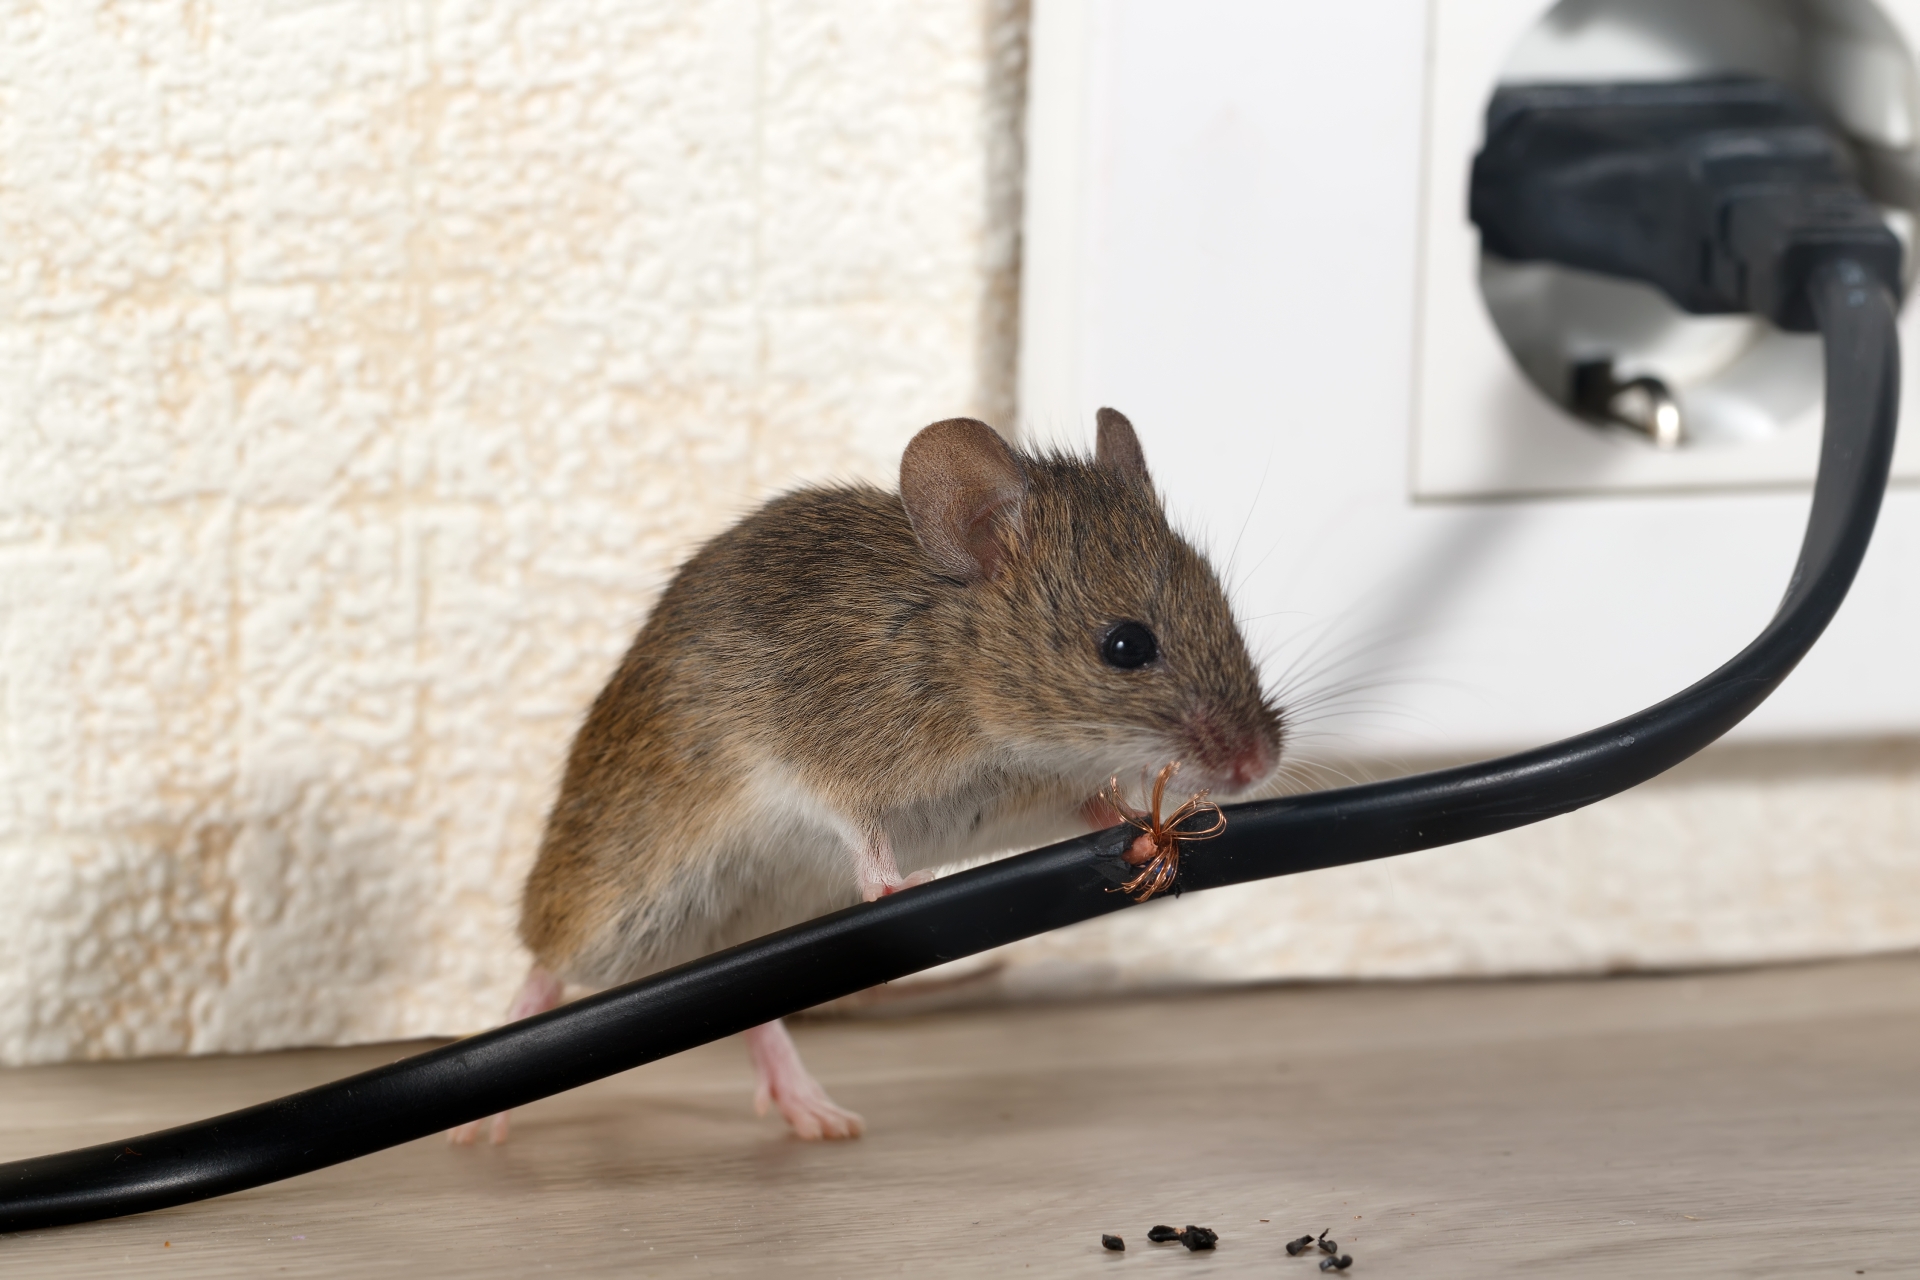 Mice Infestation, Pest Control in Bethnal Green, E2. Call Now 020 8166 9746